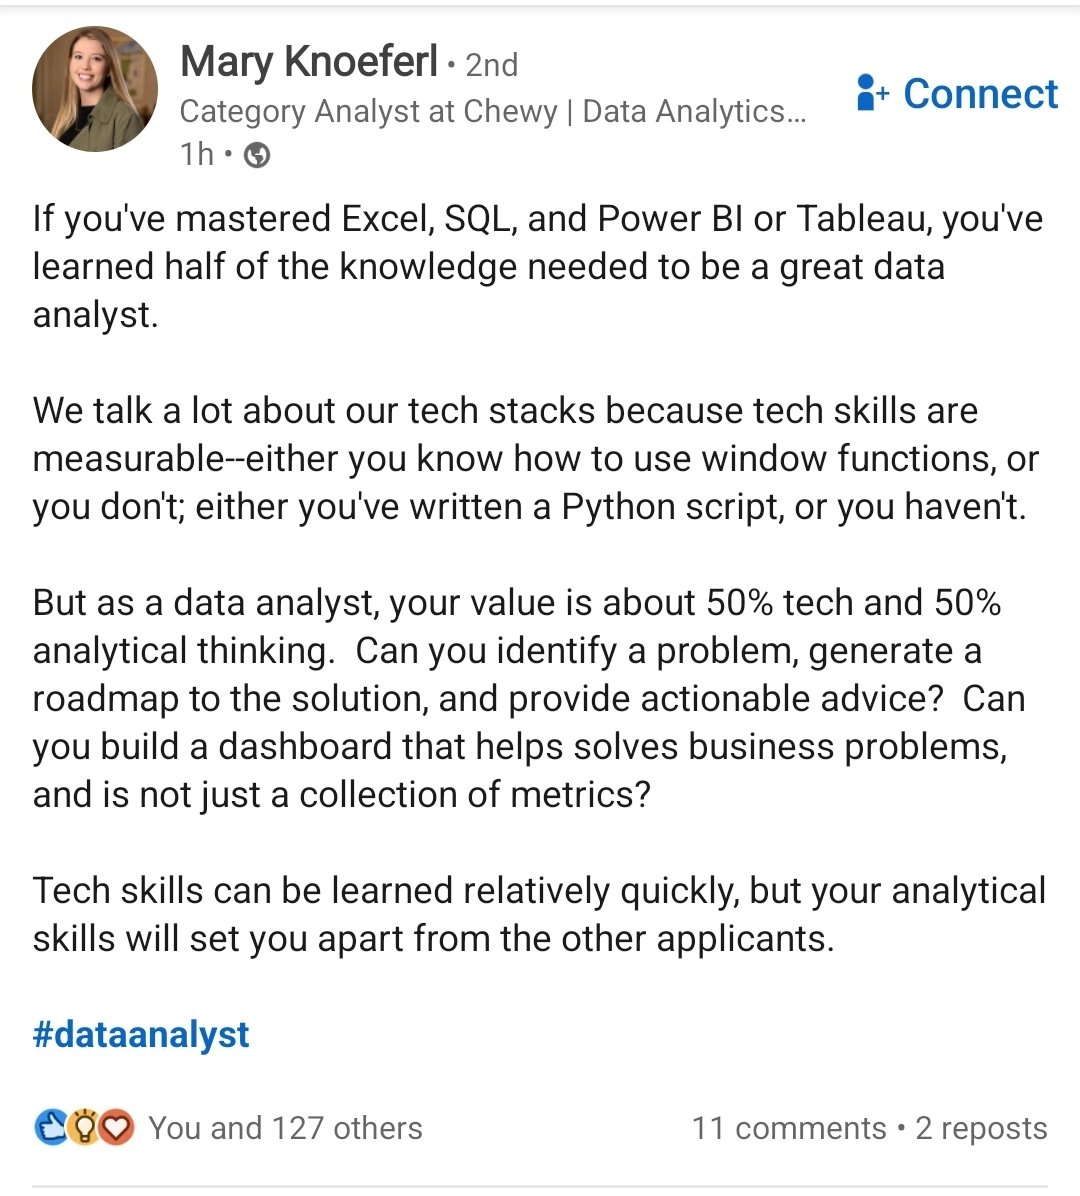 Like I always say... Anybody can analyze data, but not everyone can analyze data to solve problems. Critical thinking and analytical skills are very important as a Data Analyst.